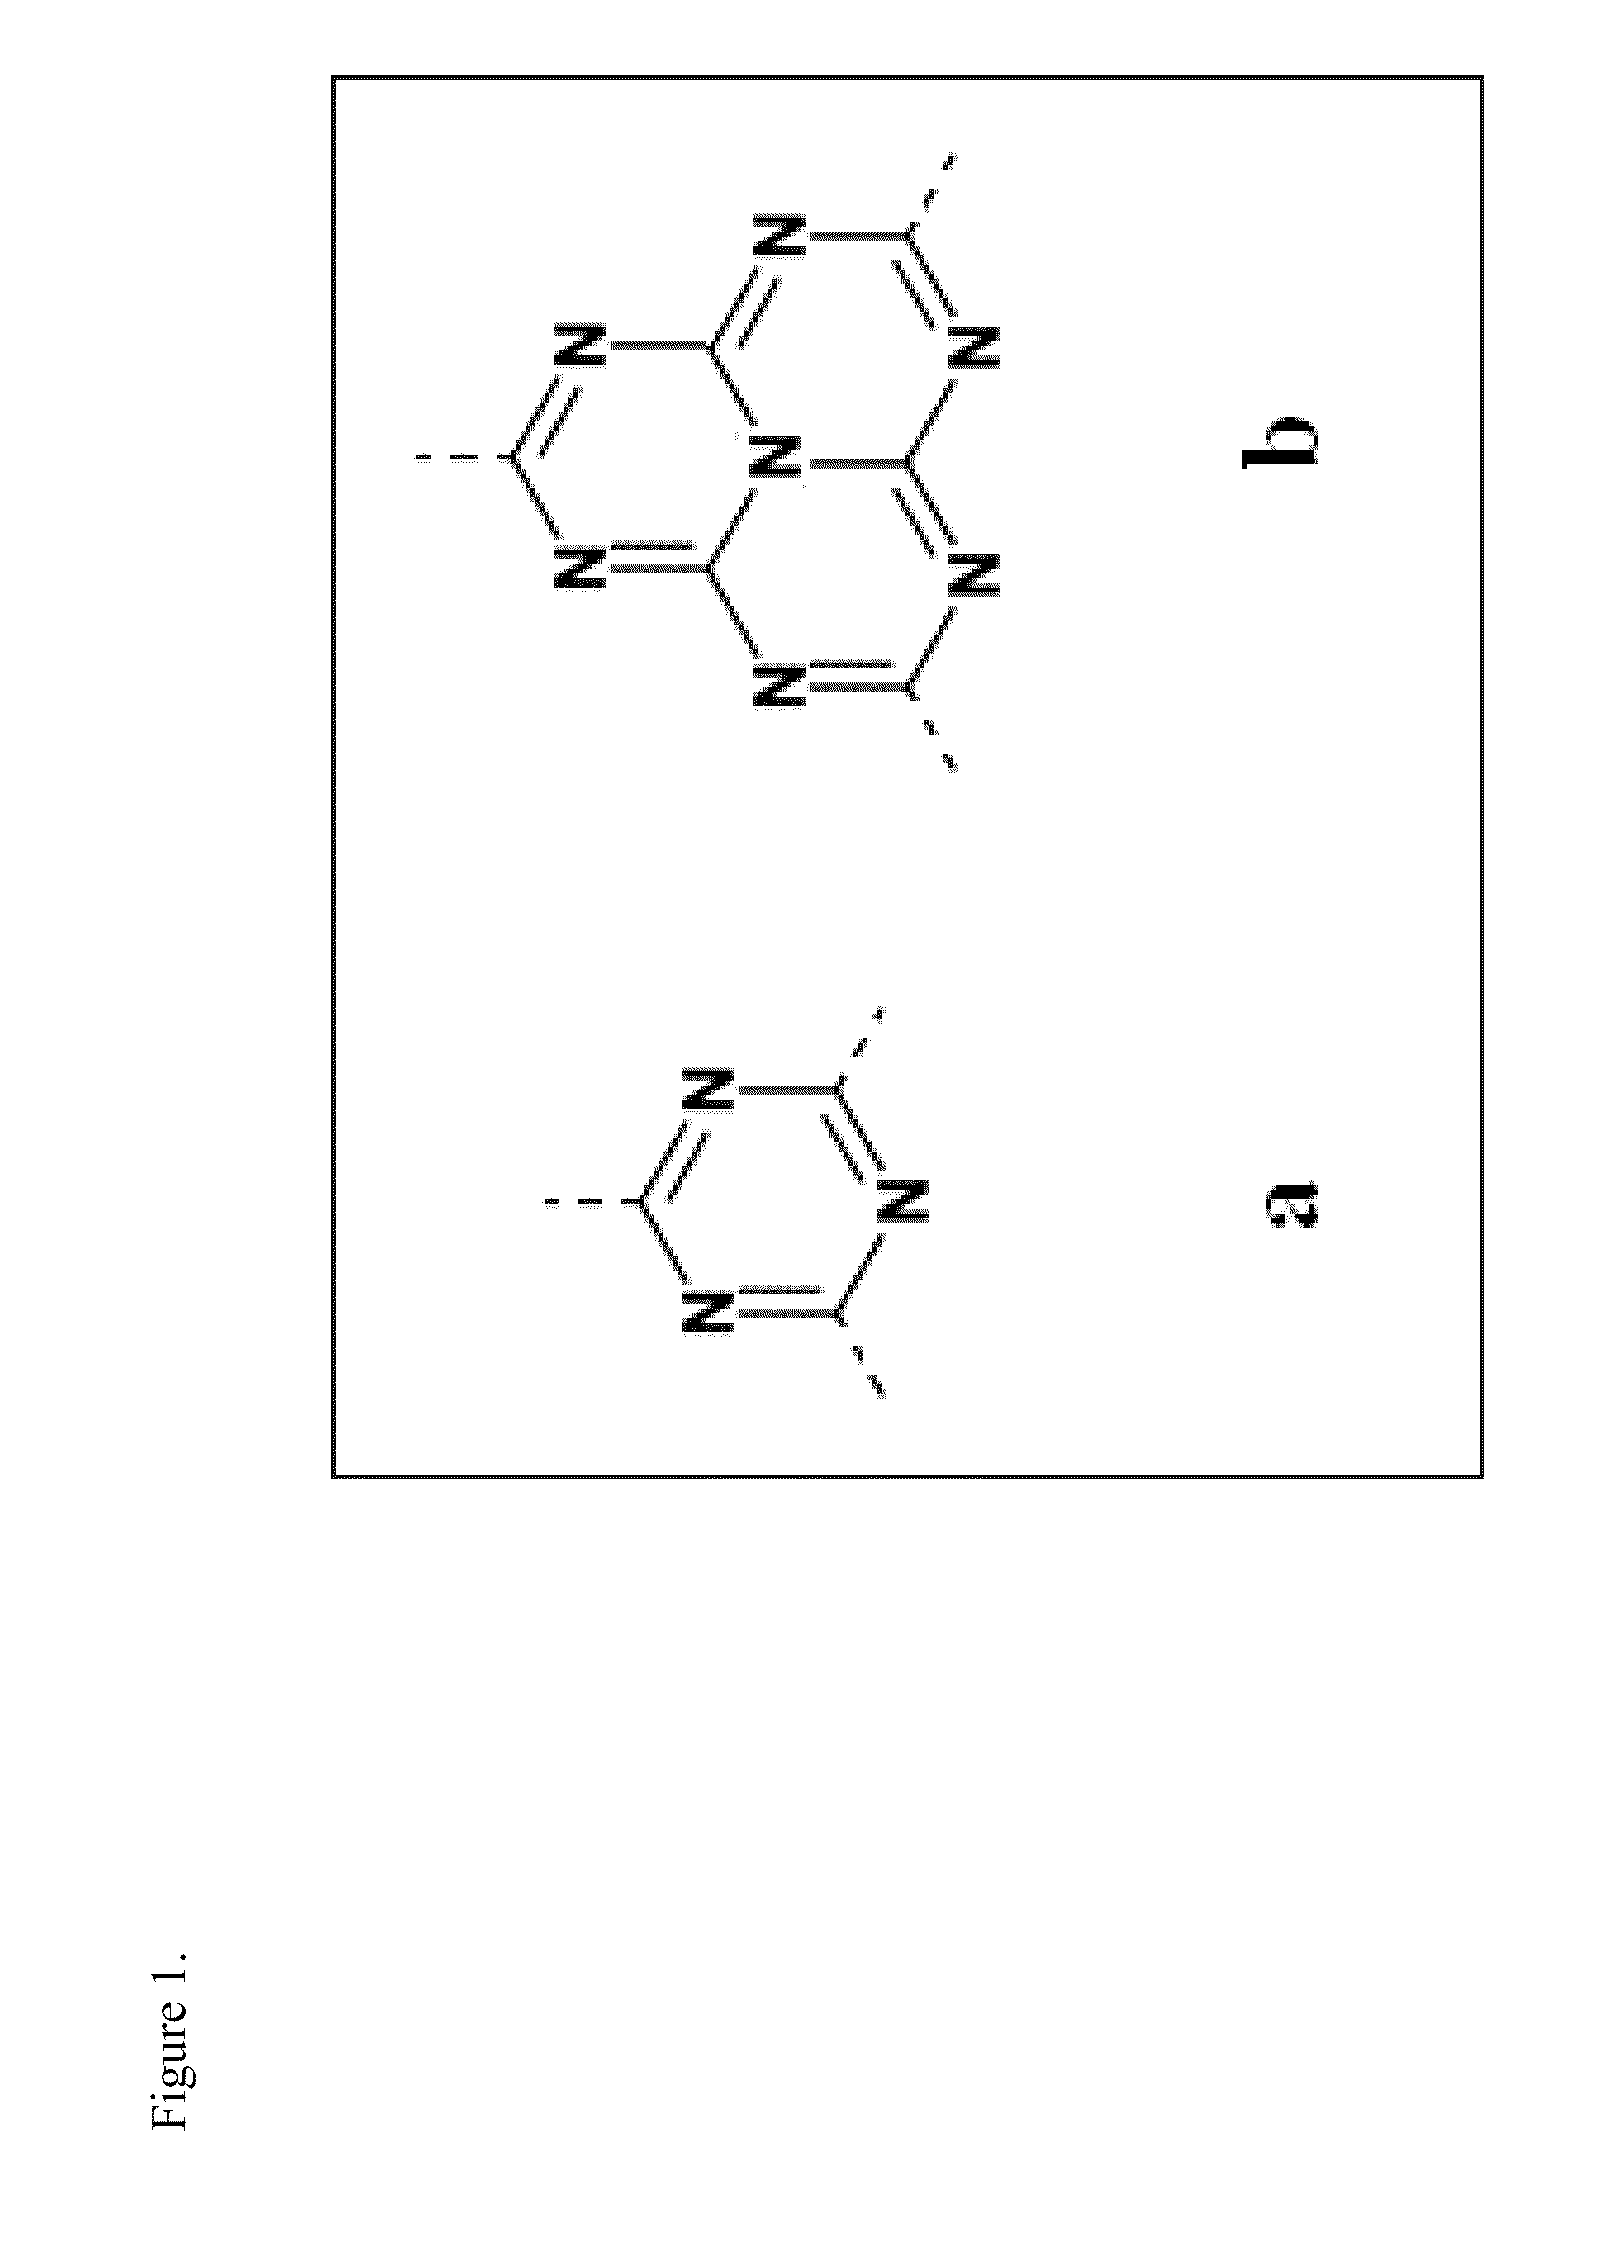 Synthesis of carbon nitrides from carbon dioxide